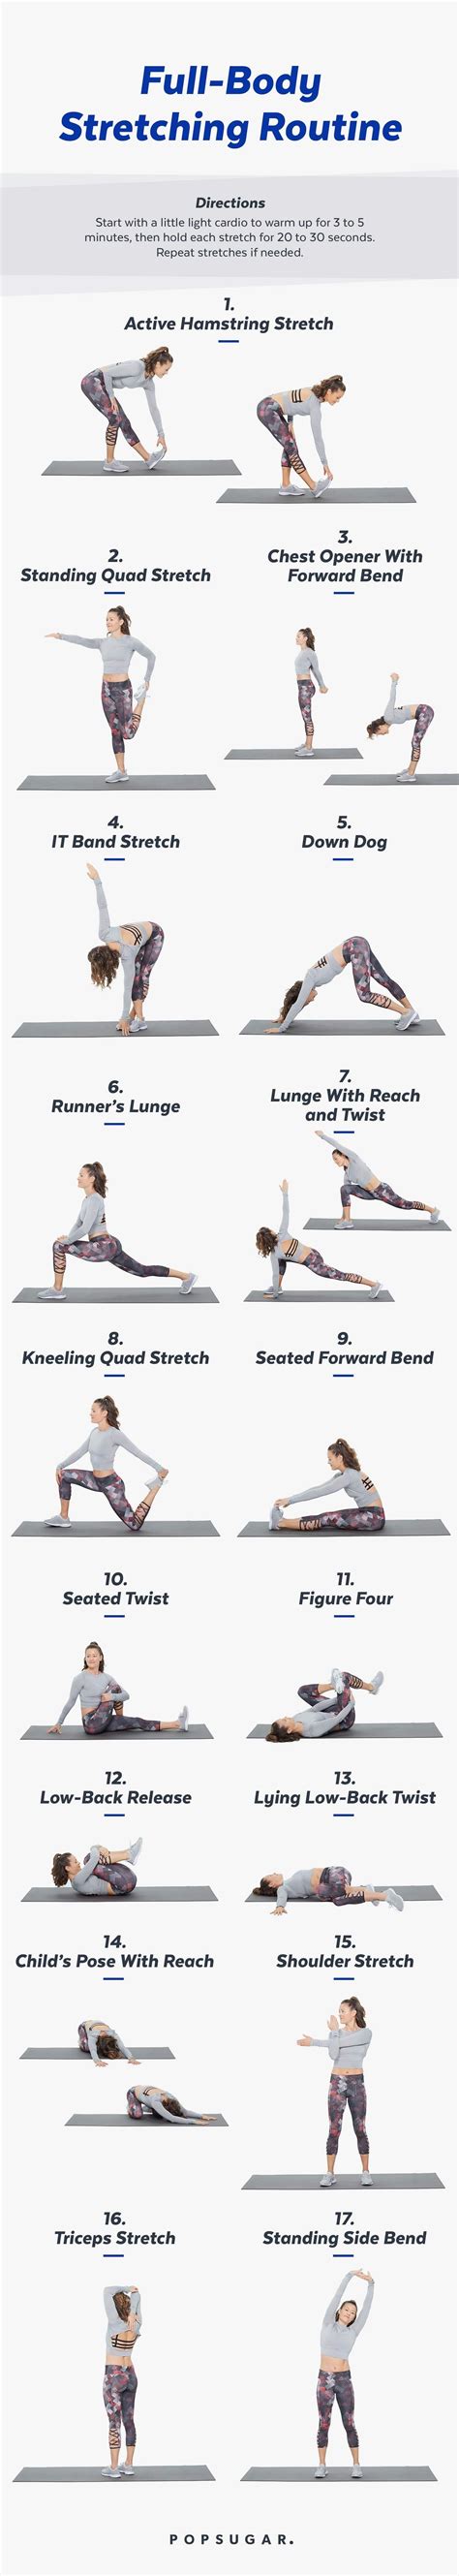 Stretch Recover Relax This Is How To Take Care Of Your Body Easy